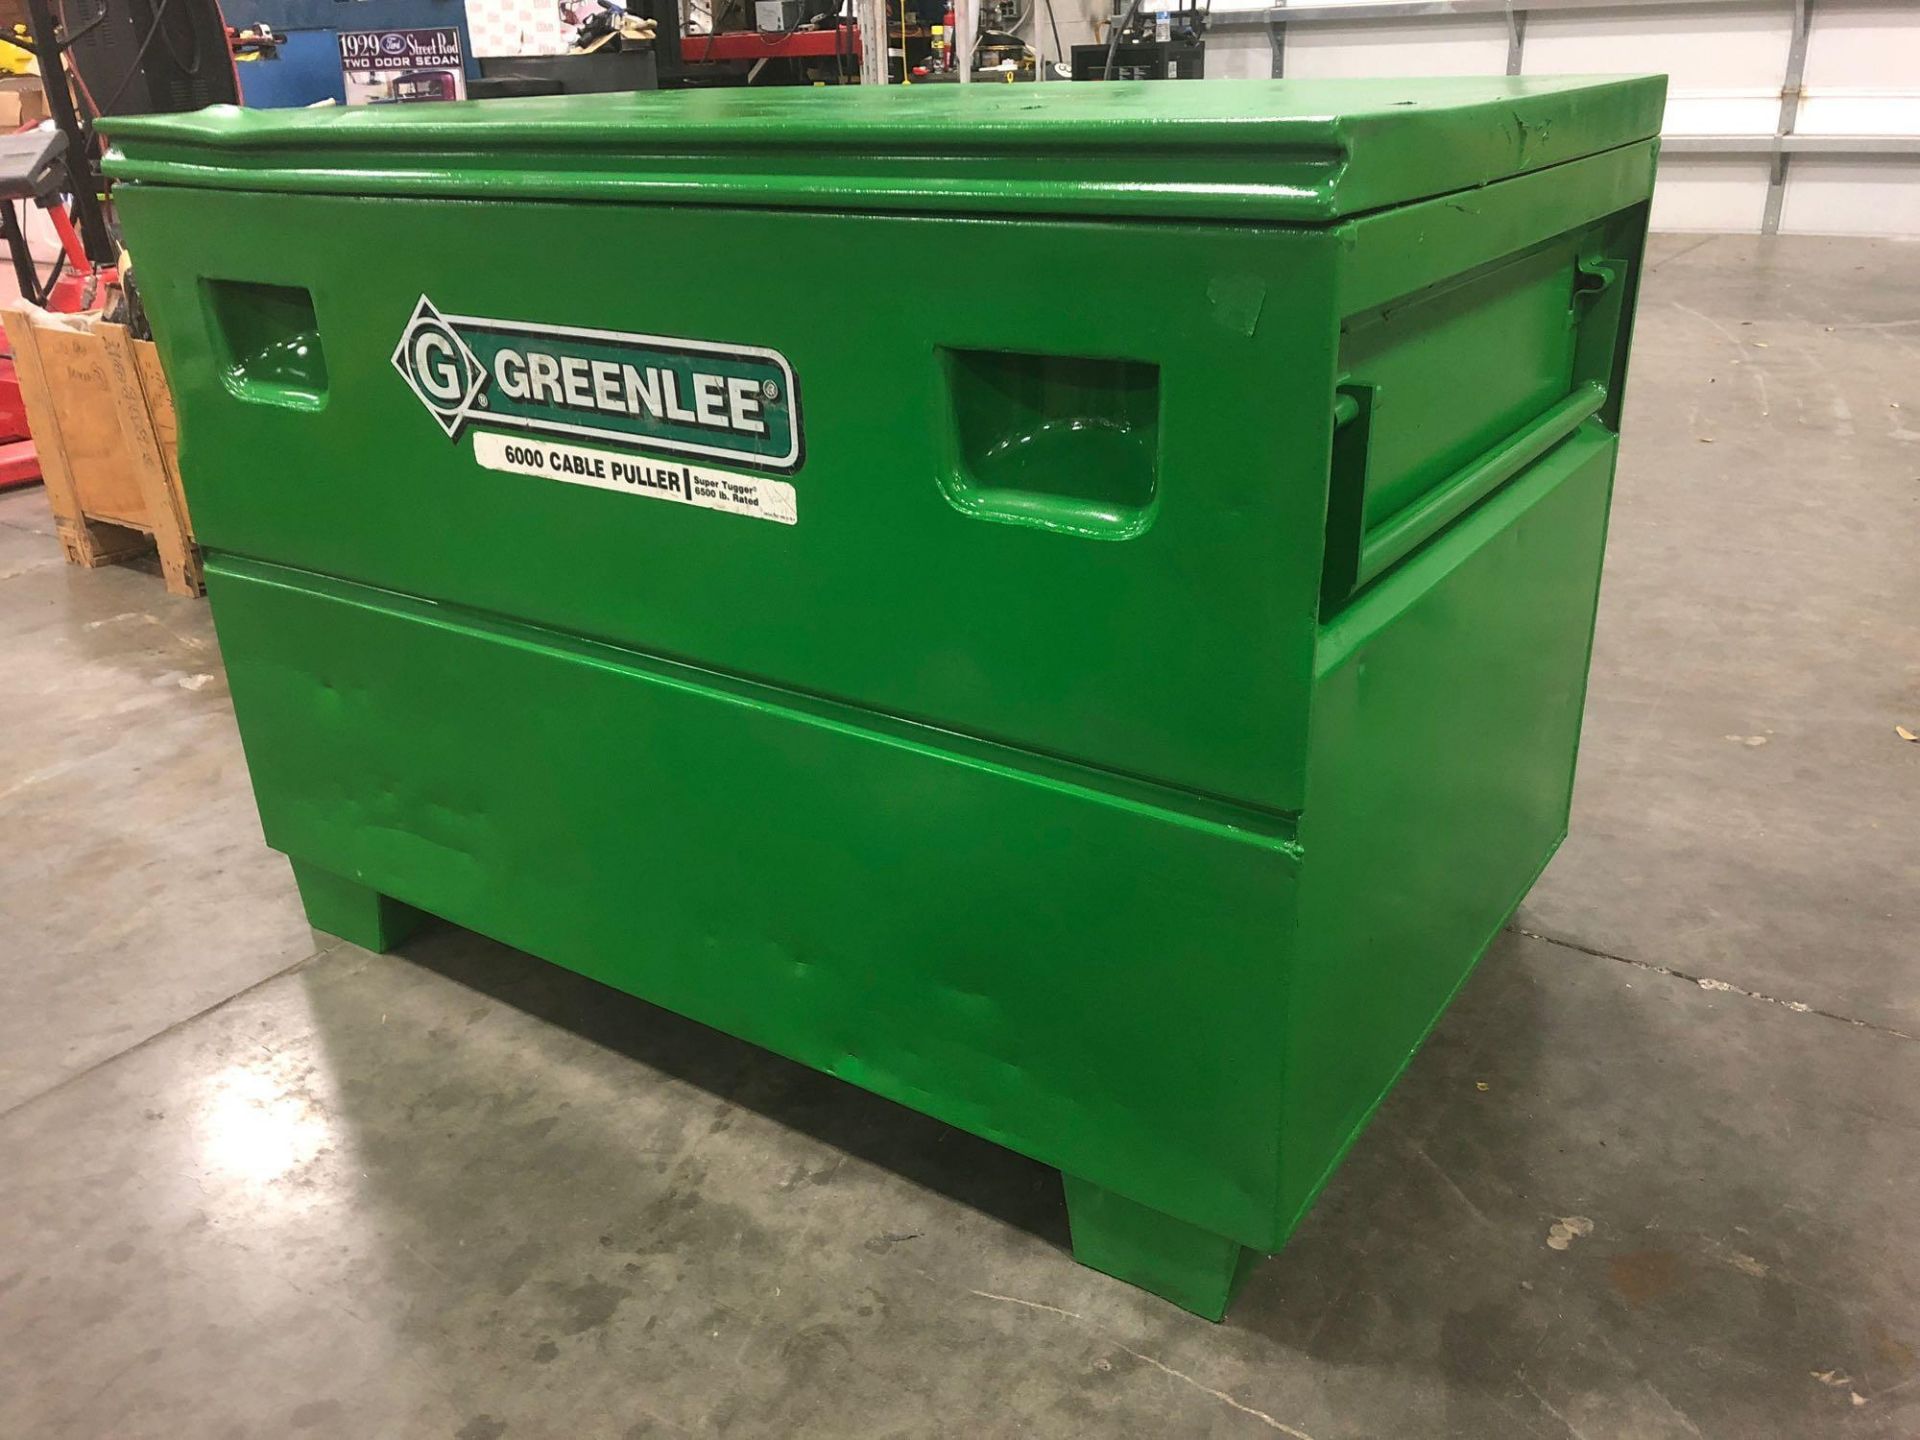 GREENLEE 6000 SUPER TUGGER CABLE PULLER WITH GREENLEE 3048/23362 STORAGE BOX 25 CU. FT. - Image 2 of 16